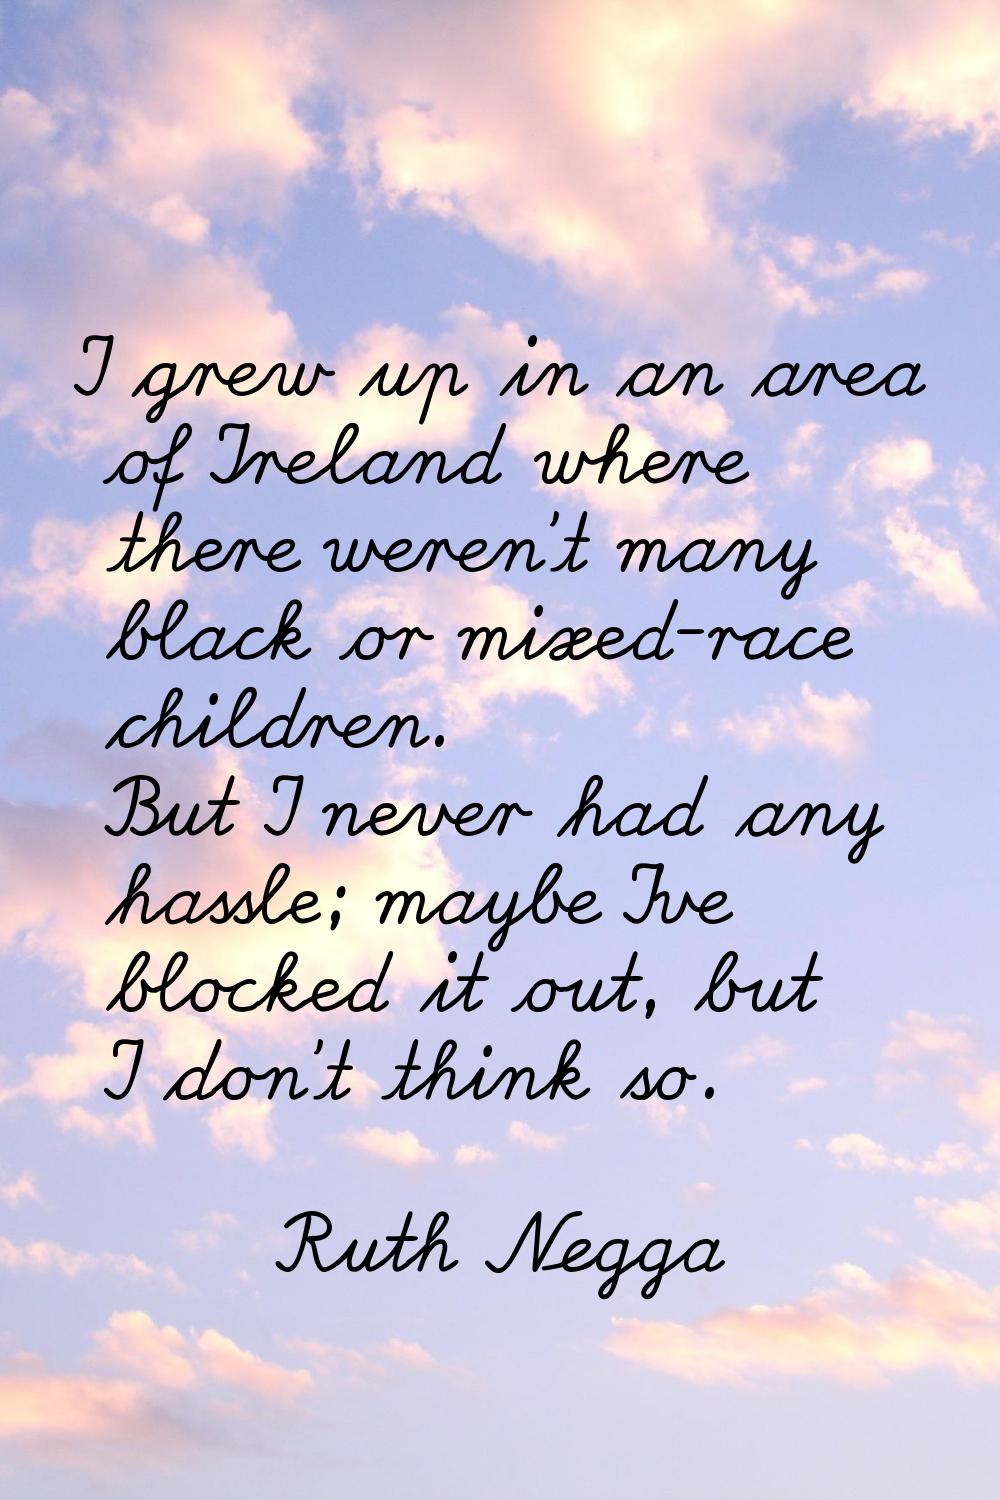 I grew up in an area of Ireland where there weren't many black or mixed-race children. But I never 